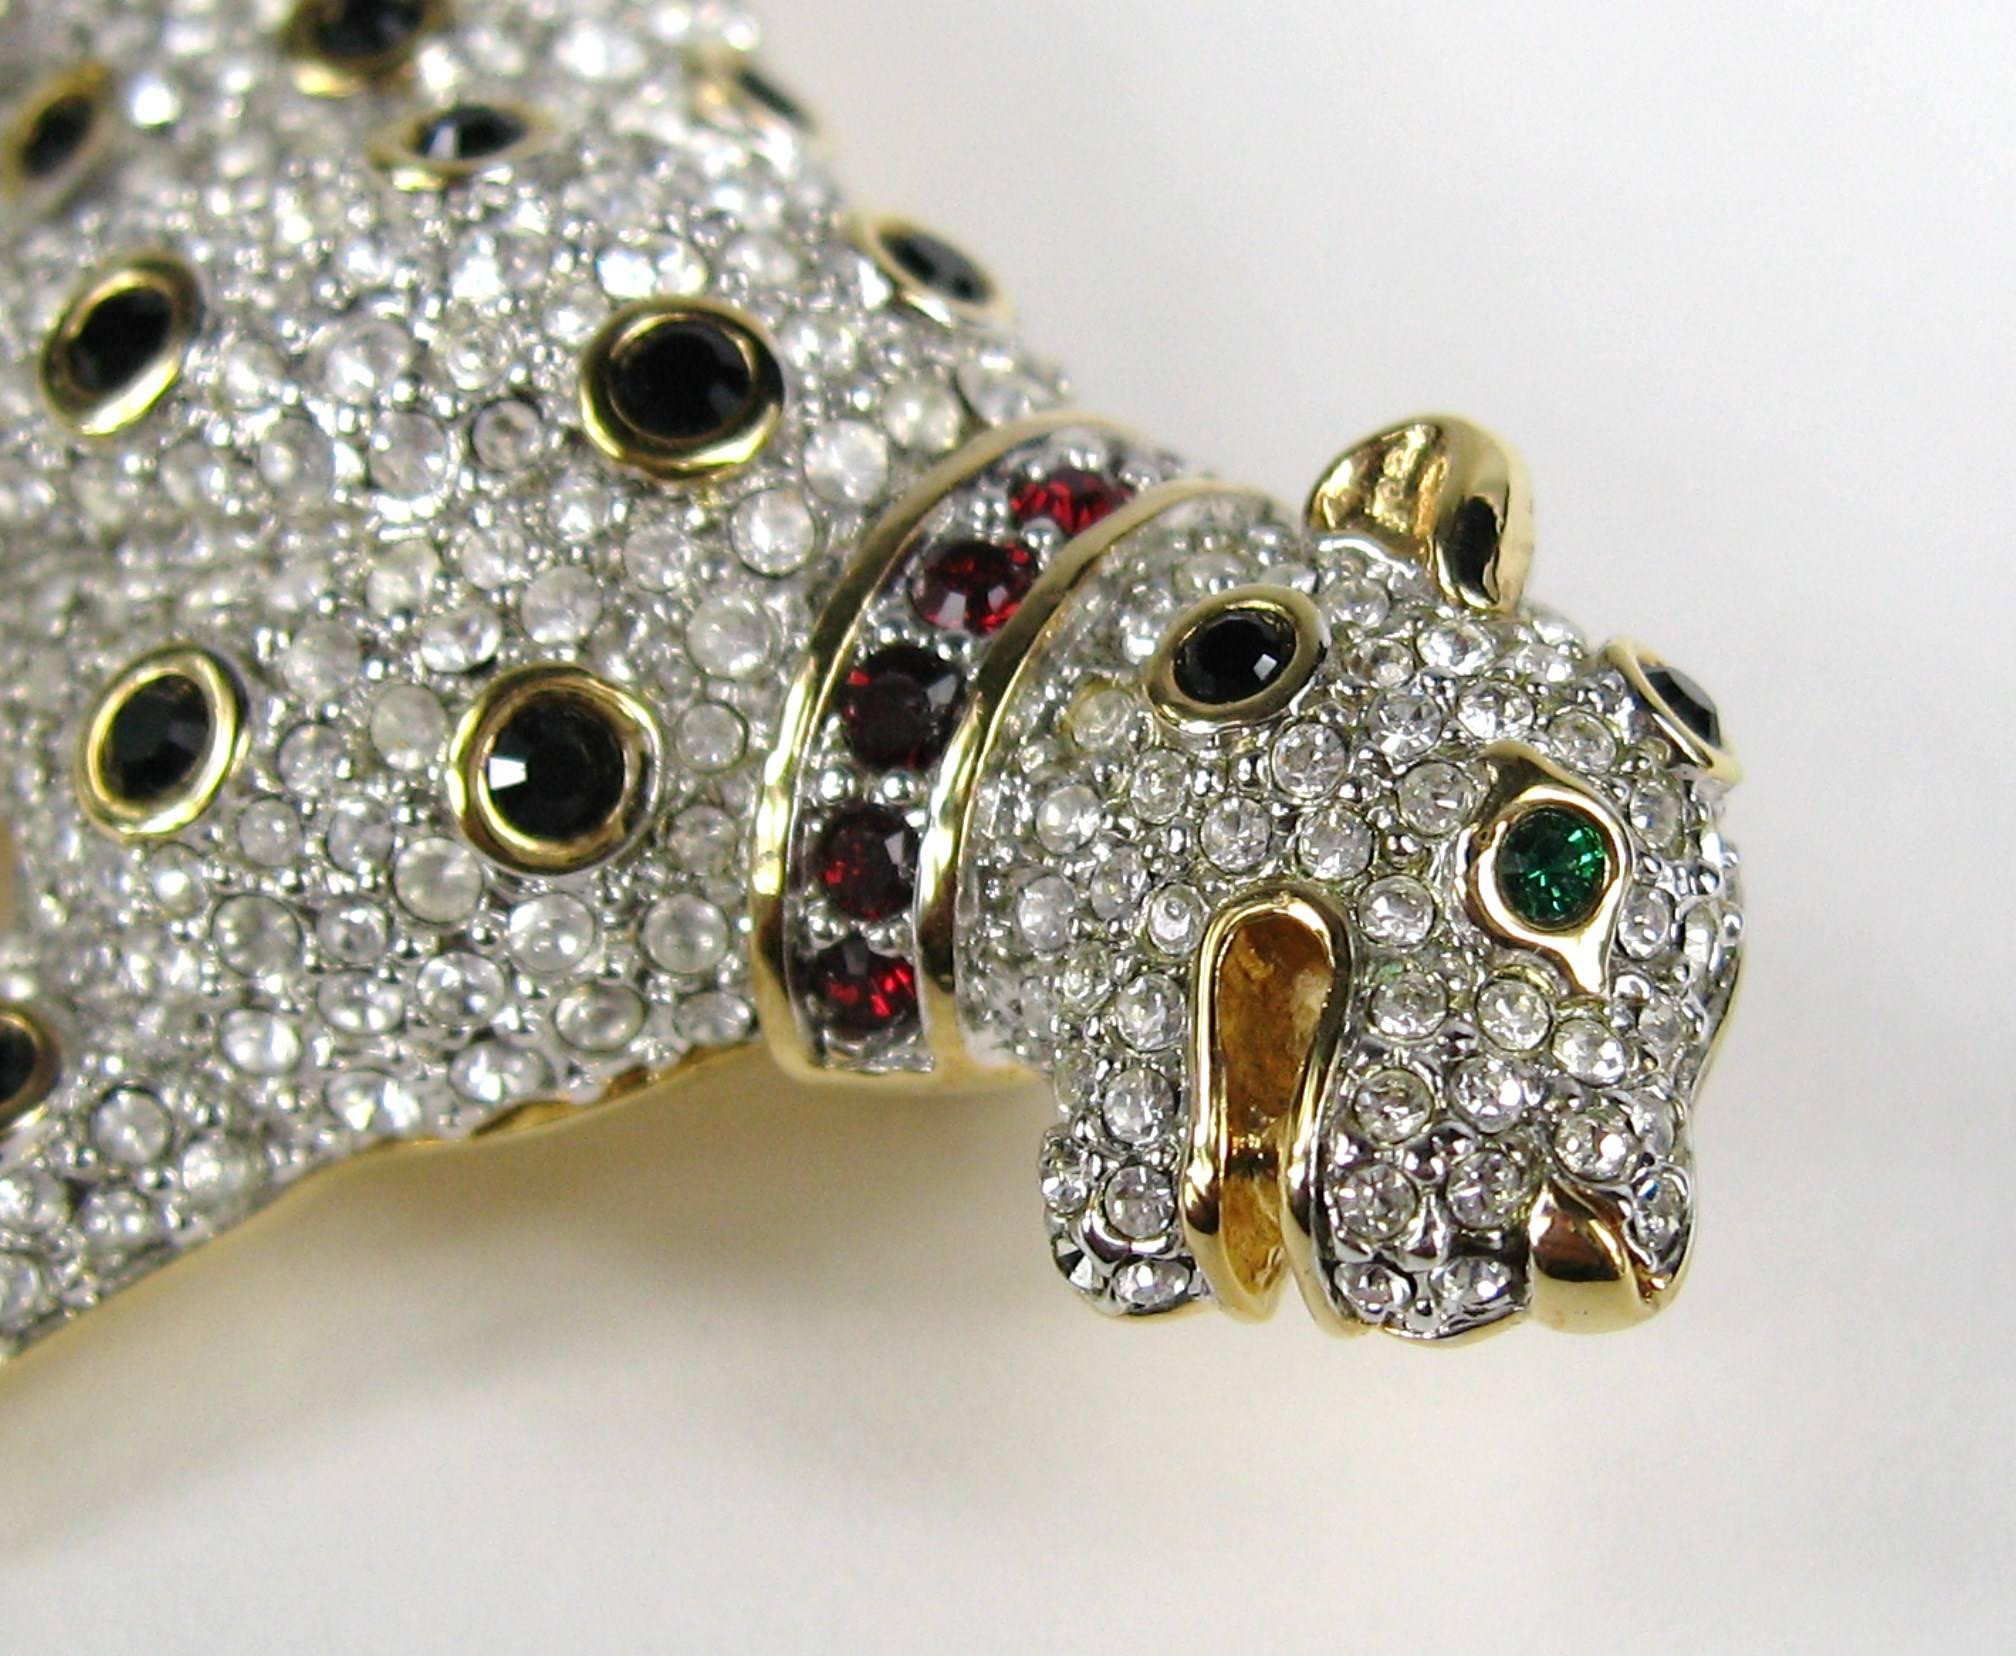 New Old Stock Swarovski Vintage Brooch. Great Sparkle! Bezel set crystals make up this amazing Cat! Sure makes a statement! Classic! measures approximately 2.60 in w /68.20 mm x 1.50 in. / 38.87mm. This is out of a massive collection of Hopi, Zuni,